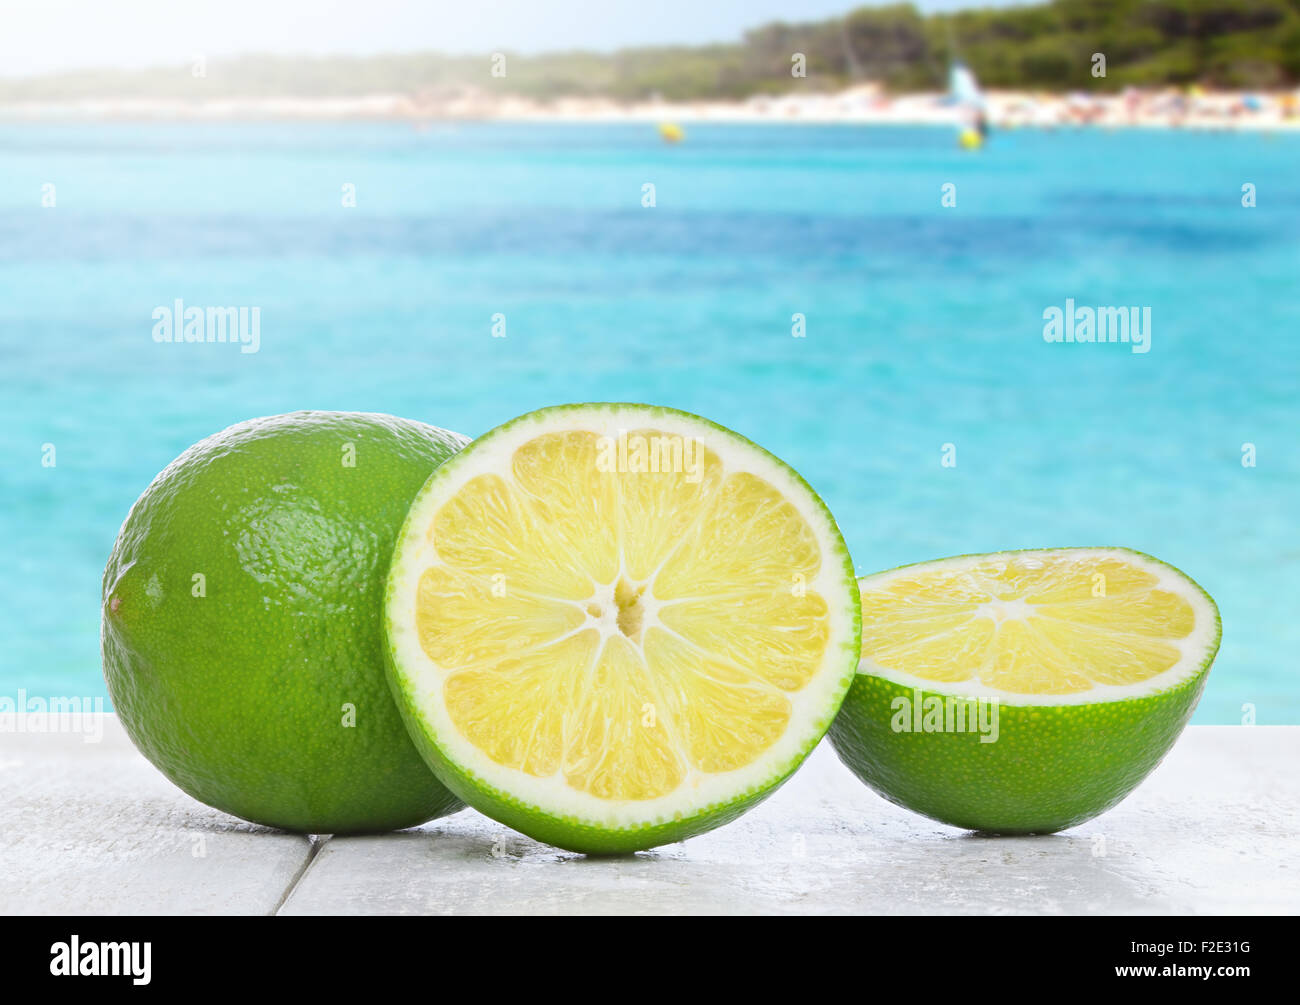 Lime on white wood table photographed at eye level on the beach Stock Photo